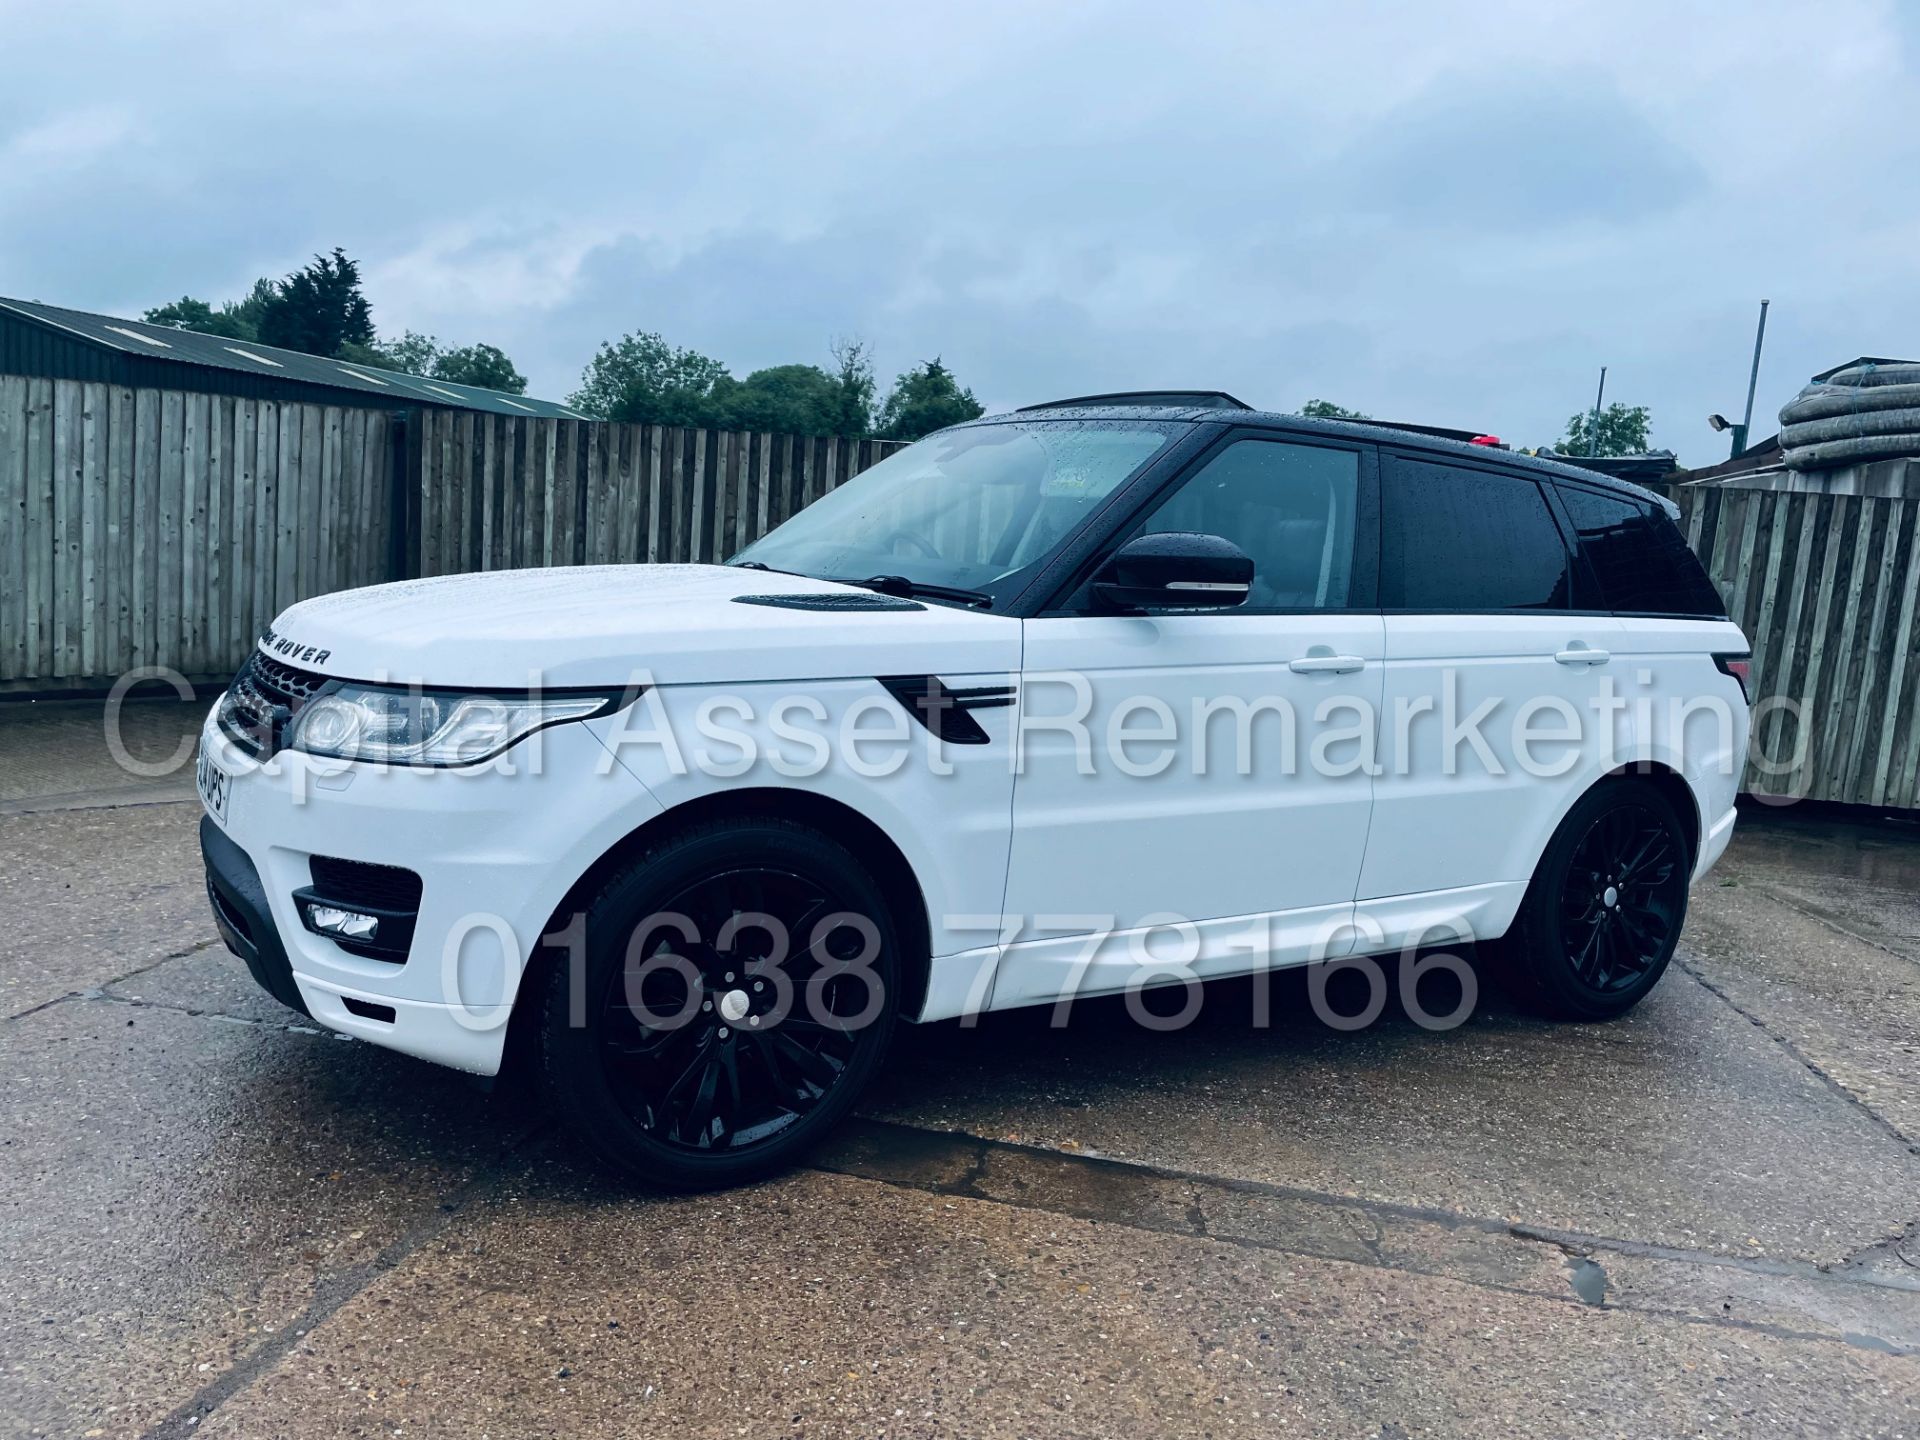 On Sale RANGE ROVER SPORT *SPECIAL EDITION* (2014) '3.0 TDV6 - AUTO' *SAT NAV & PAN ROOF* (TOP SPEC) - Image 3 of 54